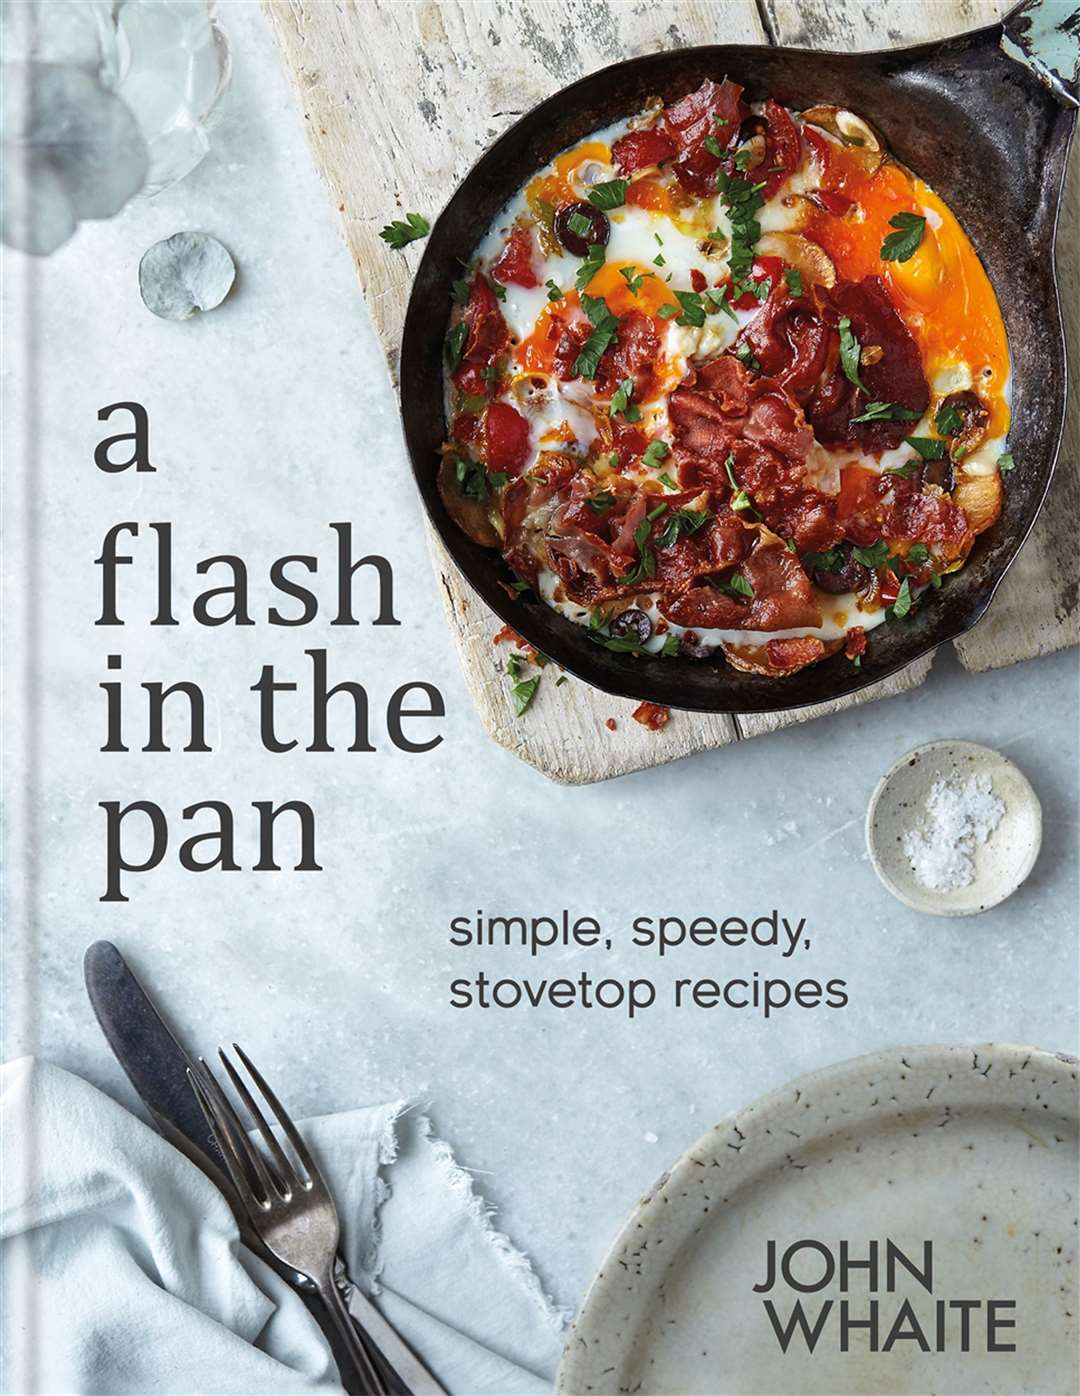 A Flash In The Pan by John Whaite is published by Kyle Books, priced £20. Available now.